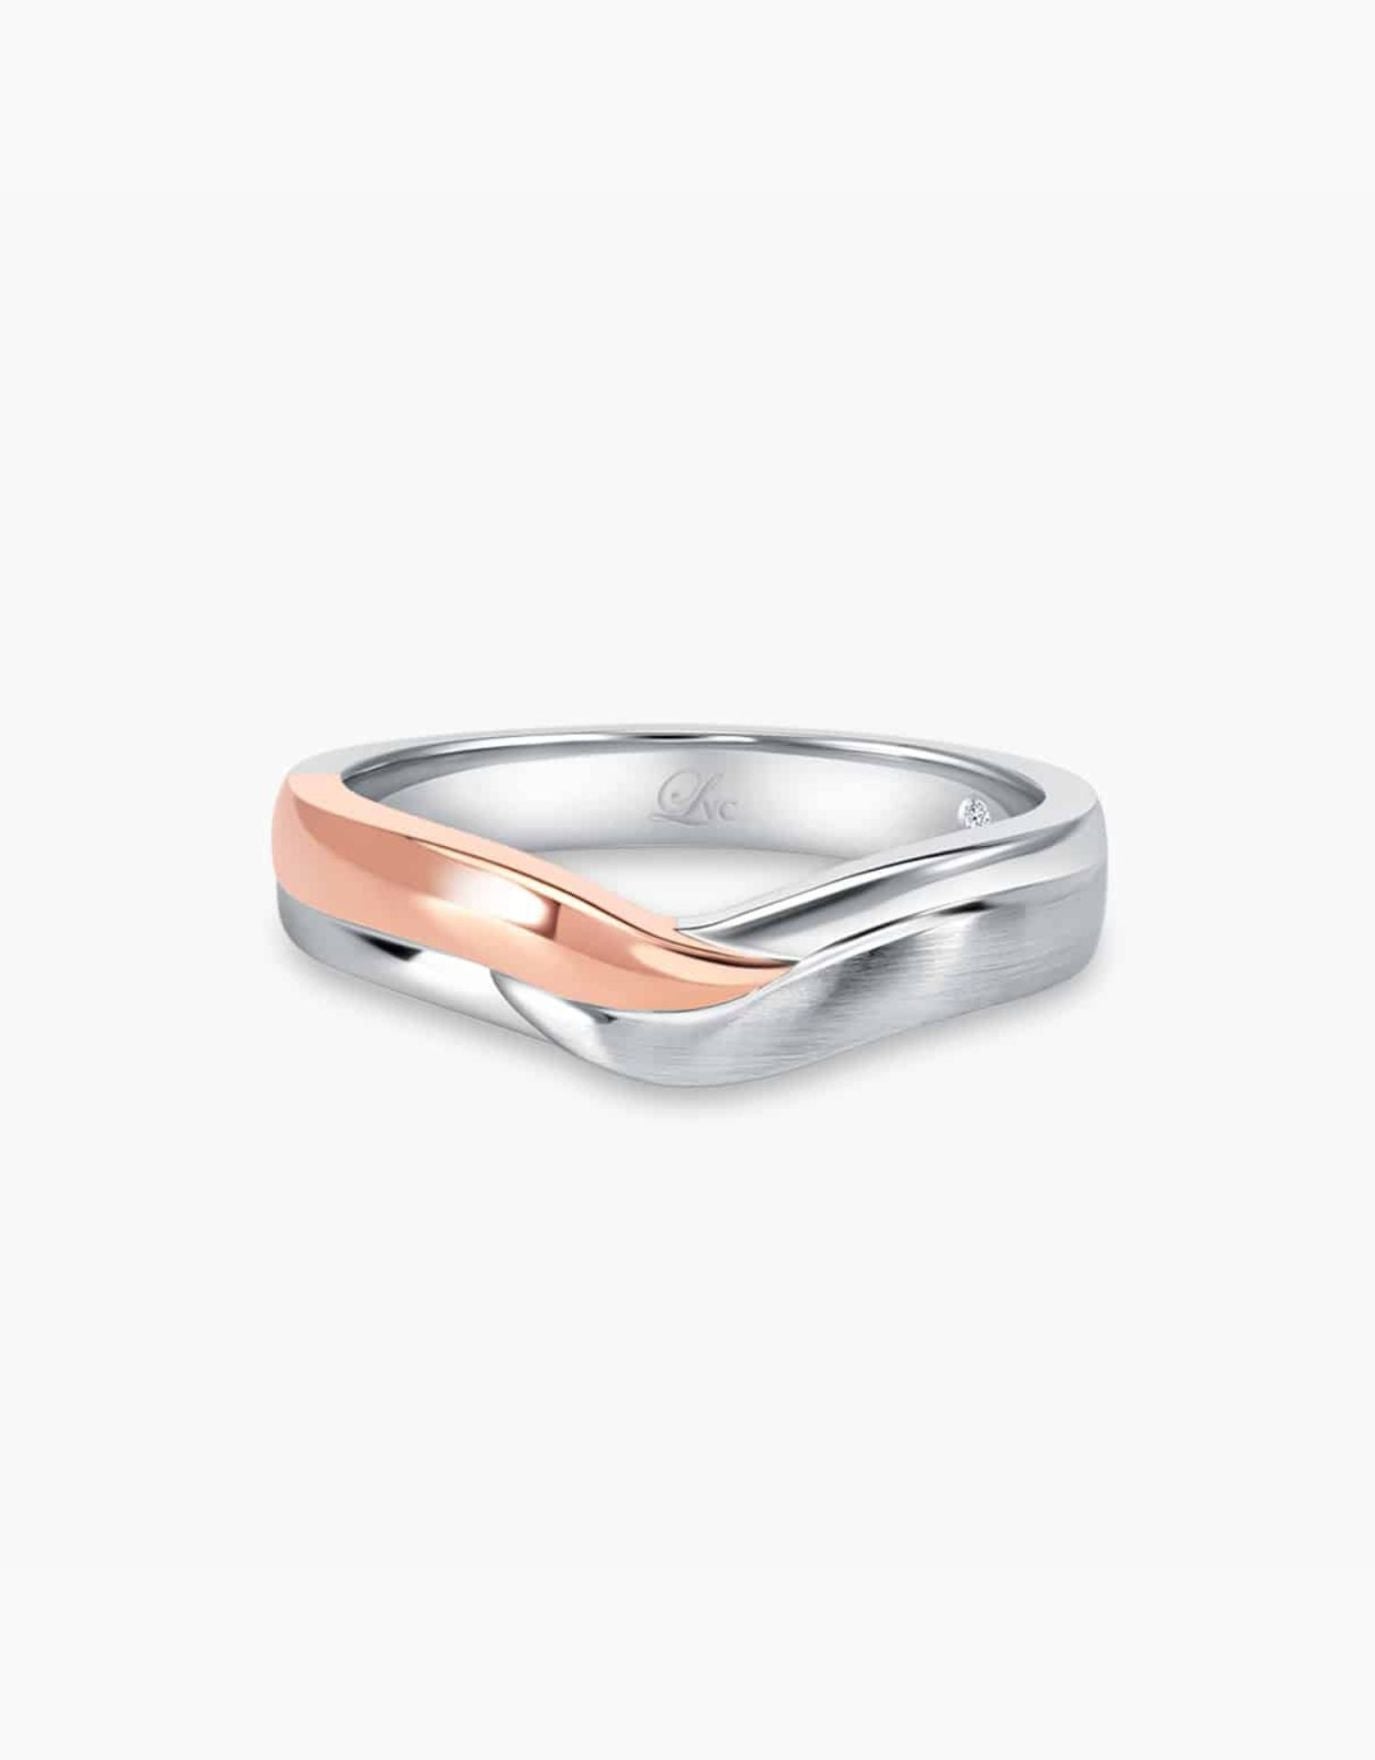 LVC Perfection Hope Wedding Band in White and Rose Gold